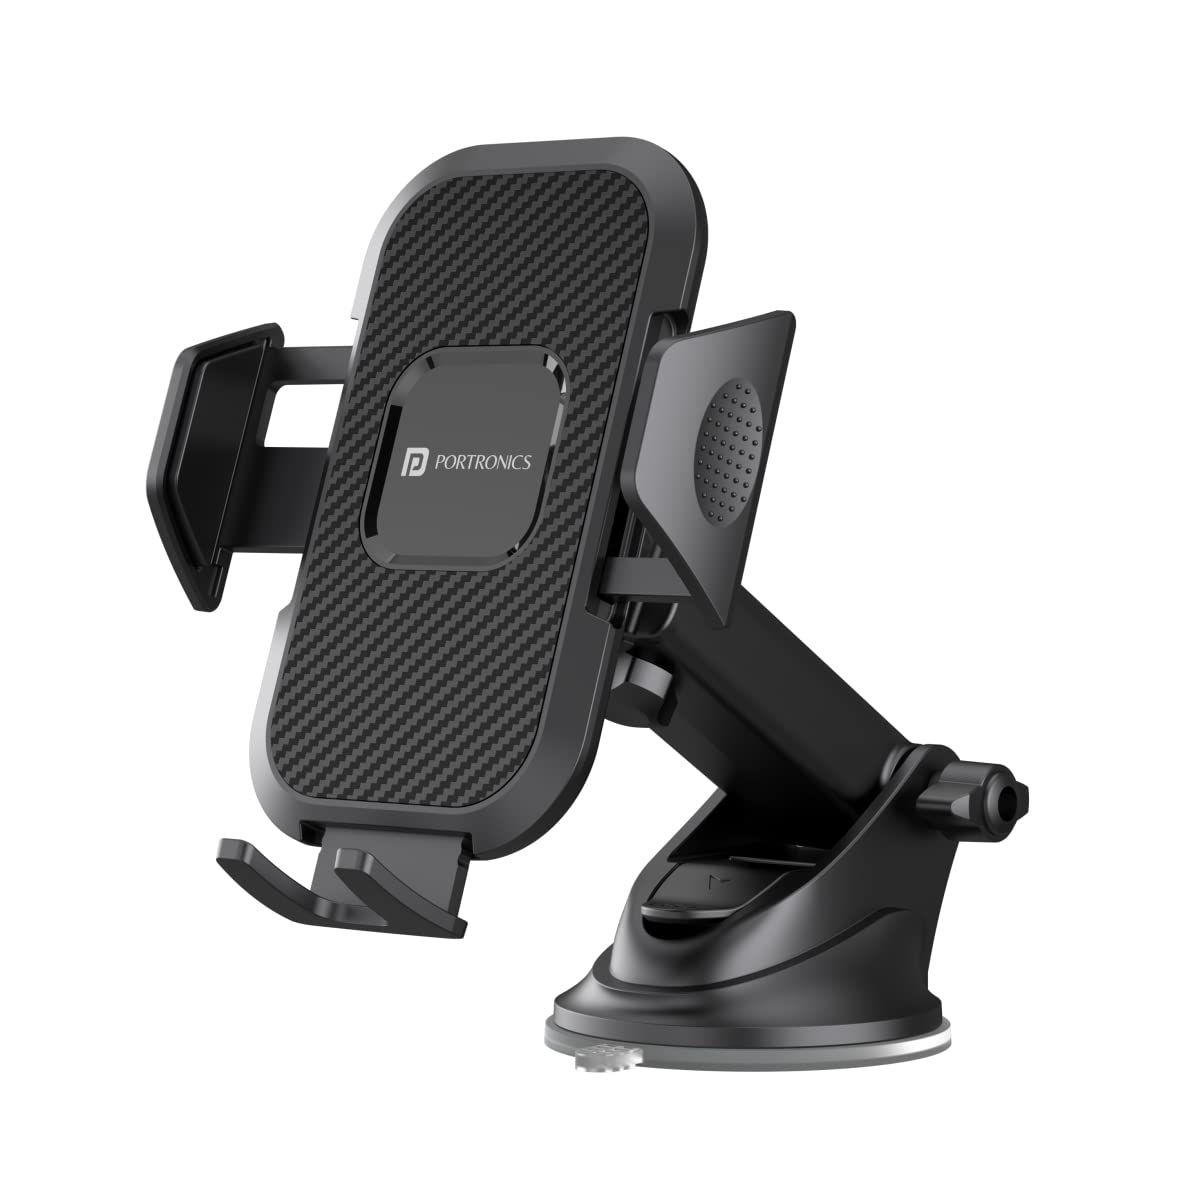 Premium Cradle-Type Car Mount with Air Vent Clip, Adjustable Side Jaws